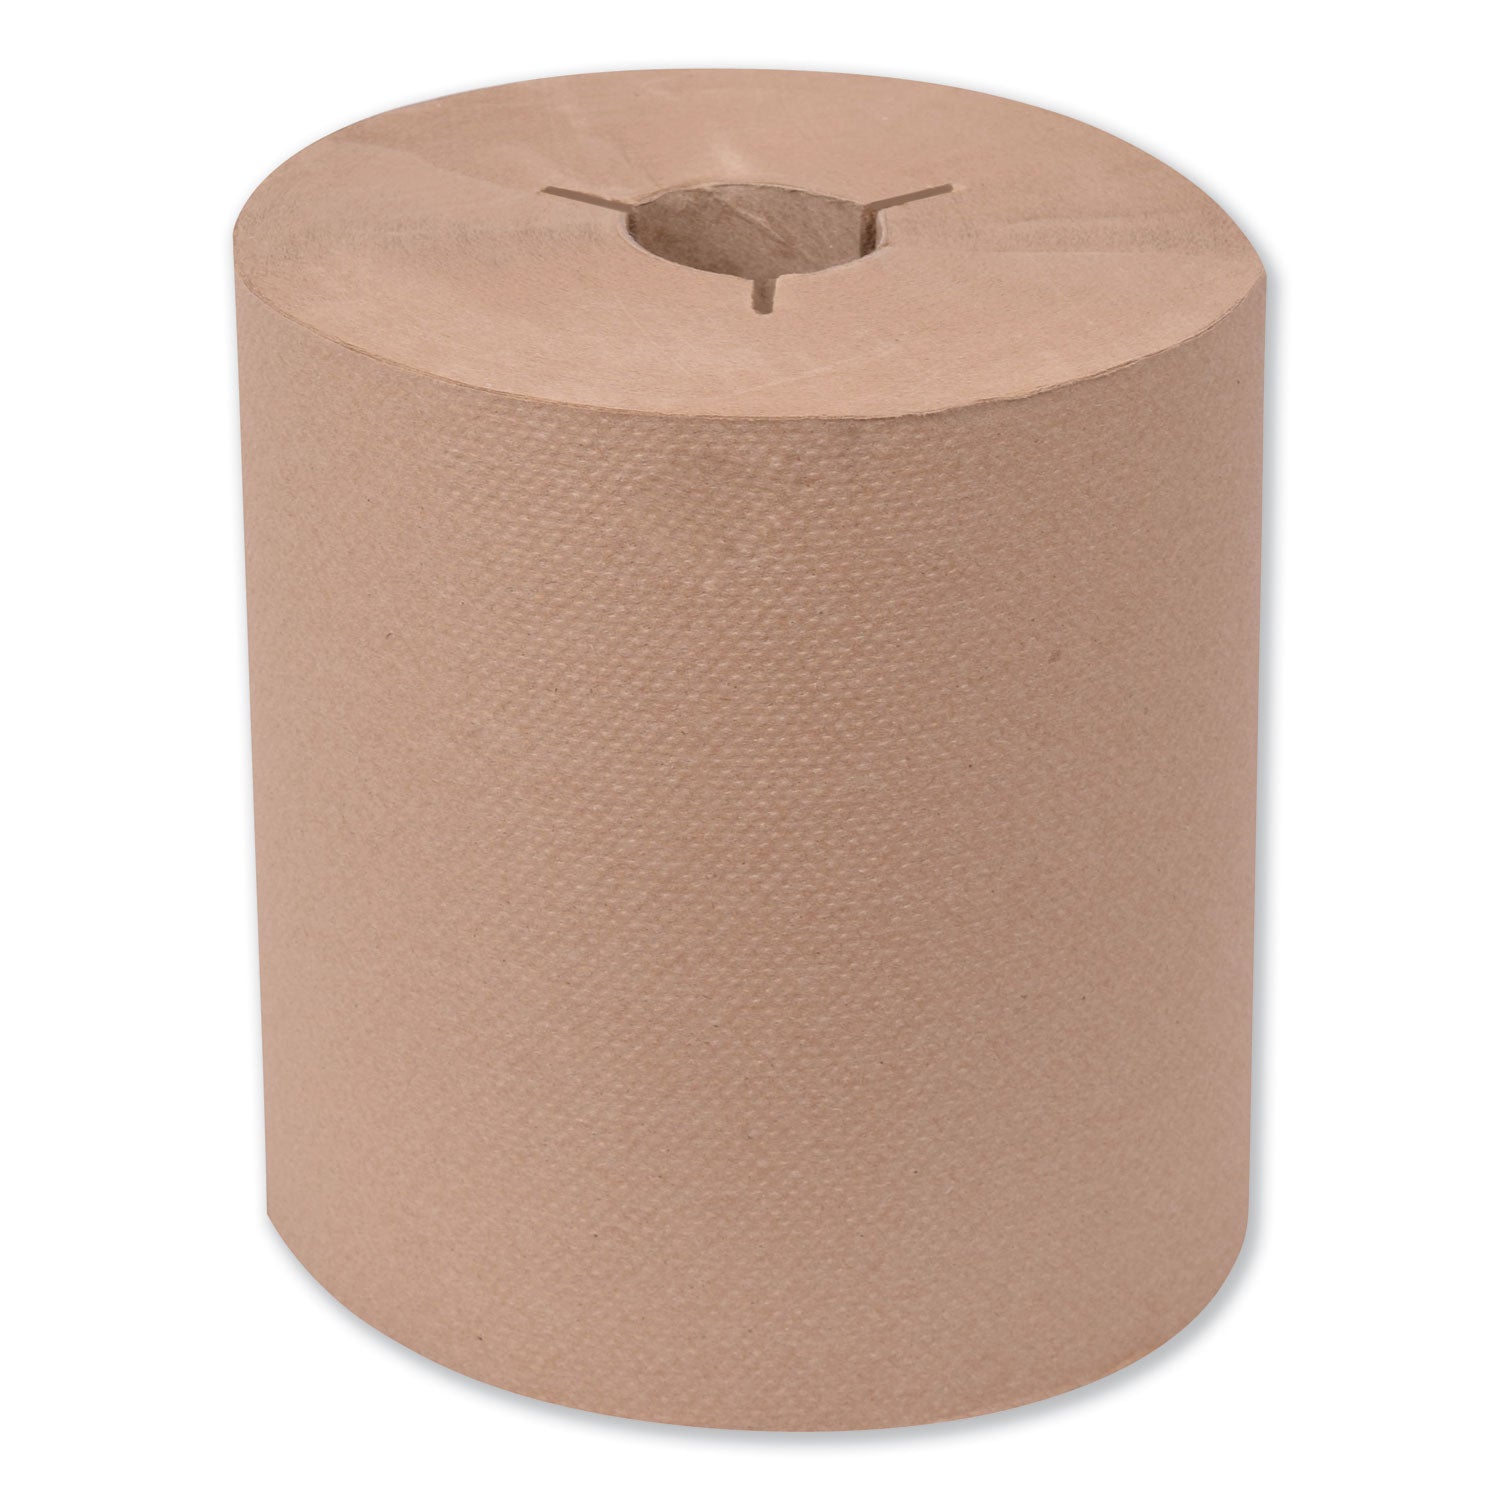 universal-hand-towel-roll-notched-1-ply-8-x-630-ft-natural-6-rolls-carton_trk8031500 - 1